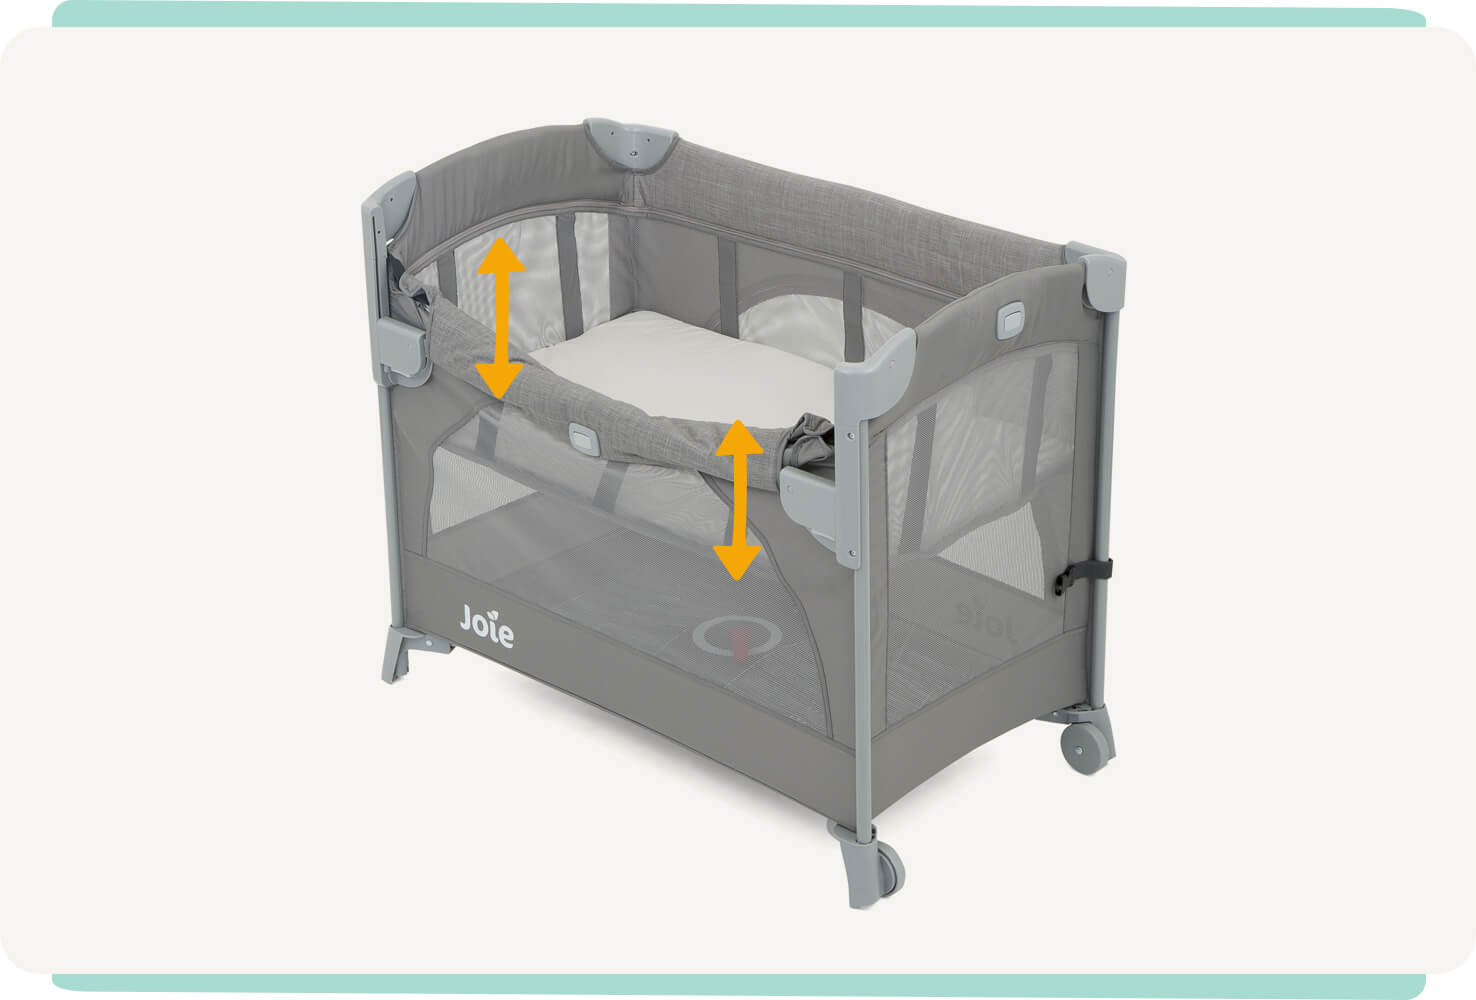 Joie kubbie sleep bedside cot in gray with lift and lower side down with arrows showing it’s movement. 